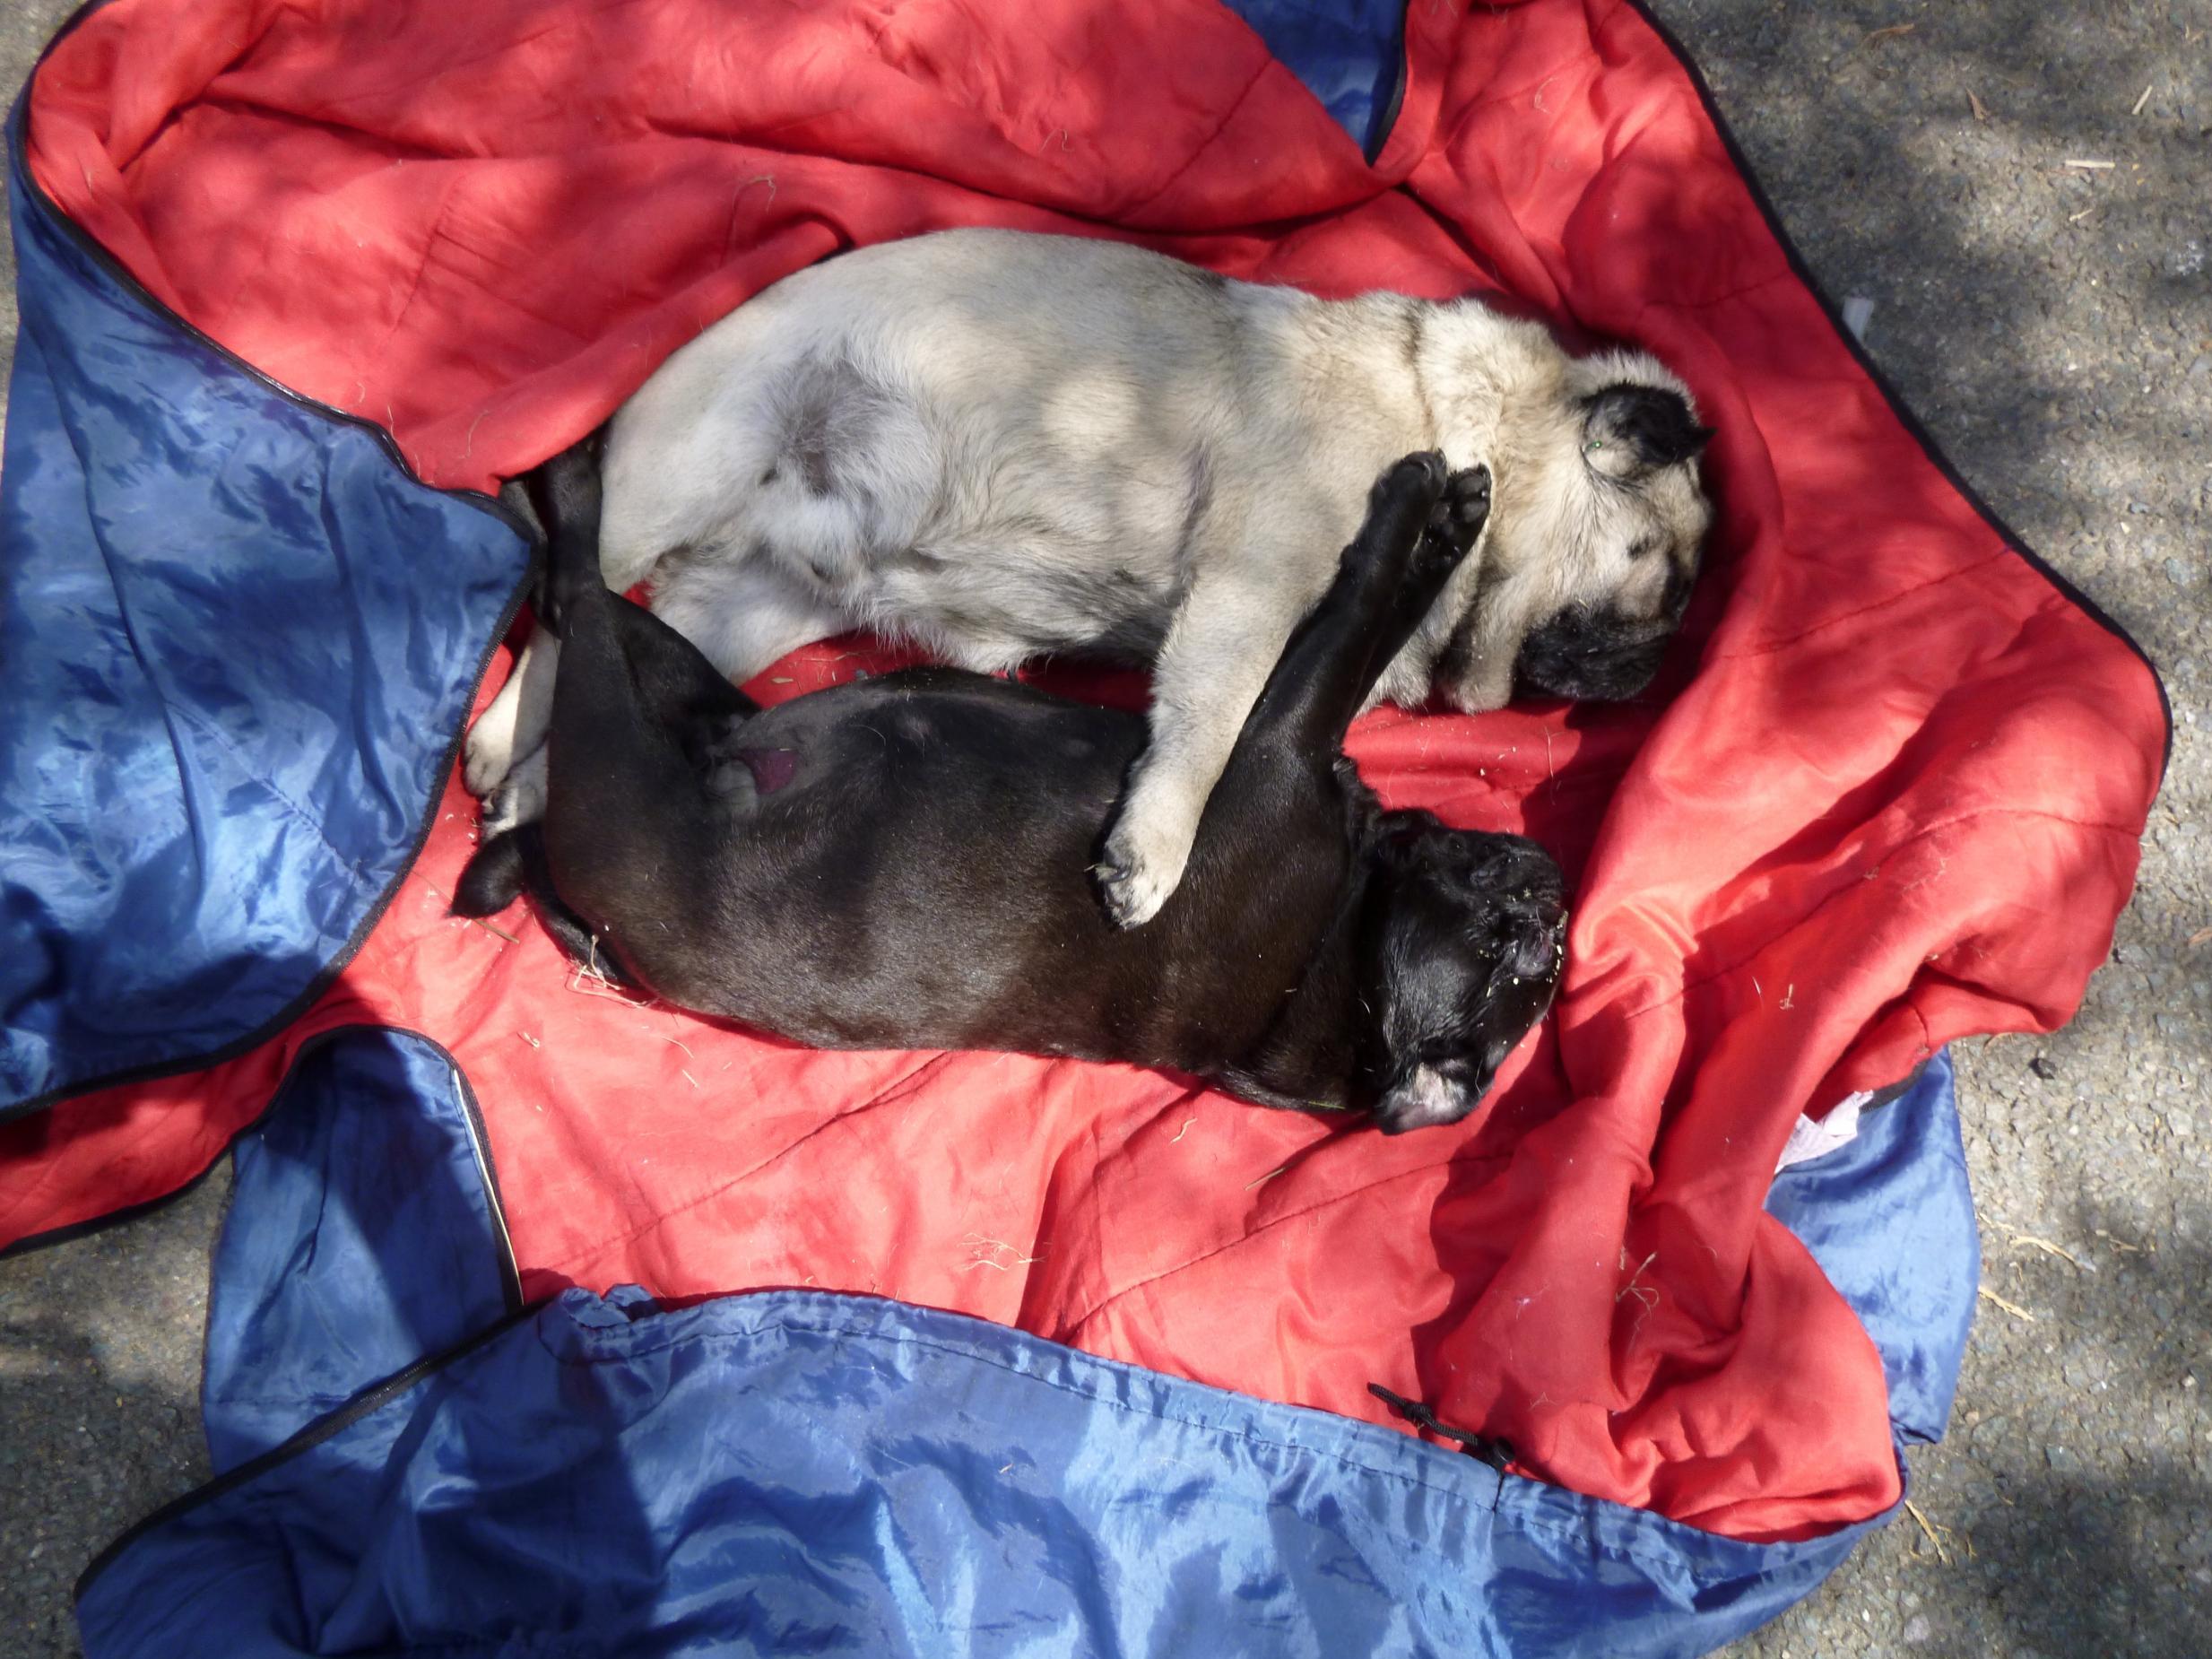 Two pugs, Millie and Tito, died after being left zipped inside a tent at Martello Bay Holiday Park in Jaywick, Essex, for eight hours on a 34C day in July 2019.